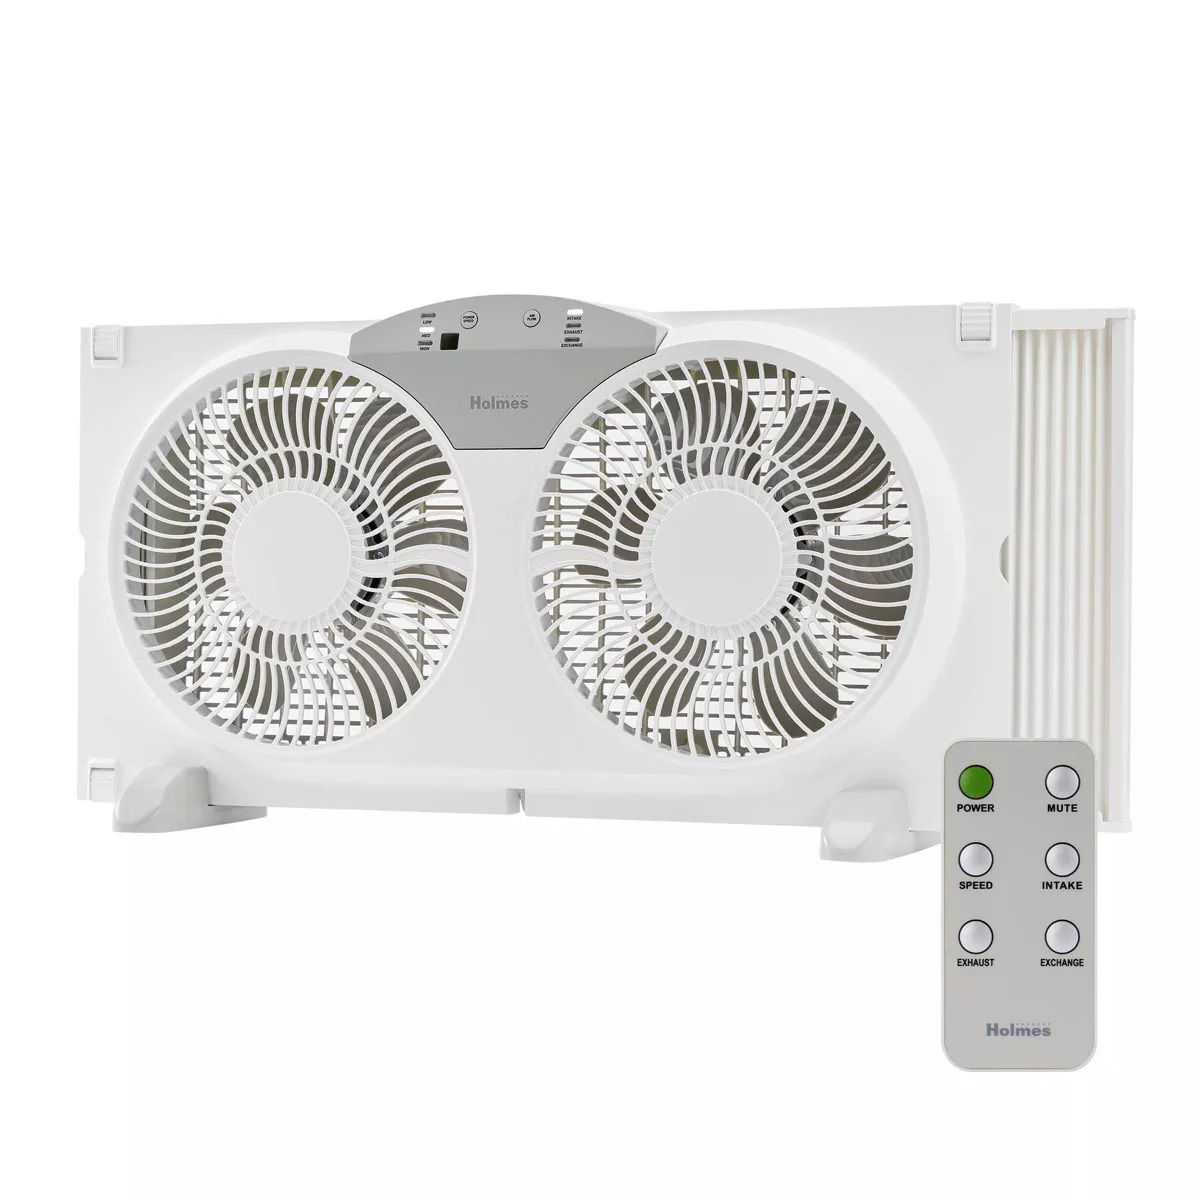 9 Digital window fan with remote control HomeHeating, Cooling & Air Quality